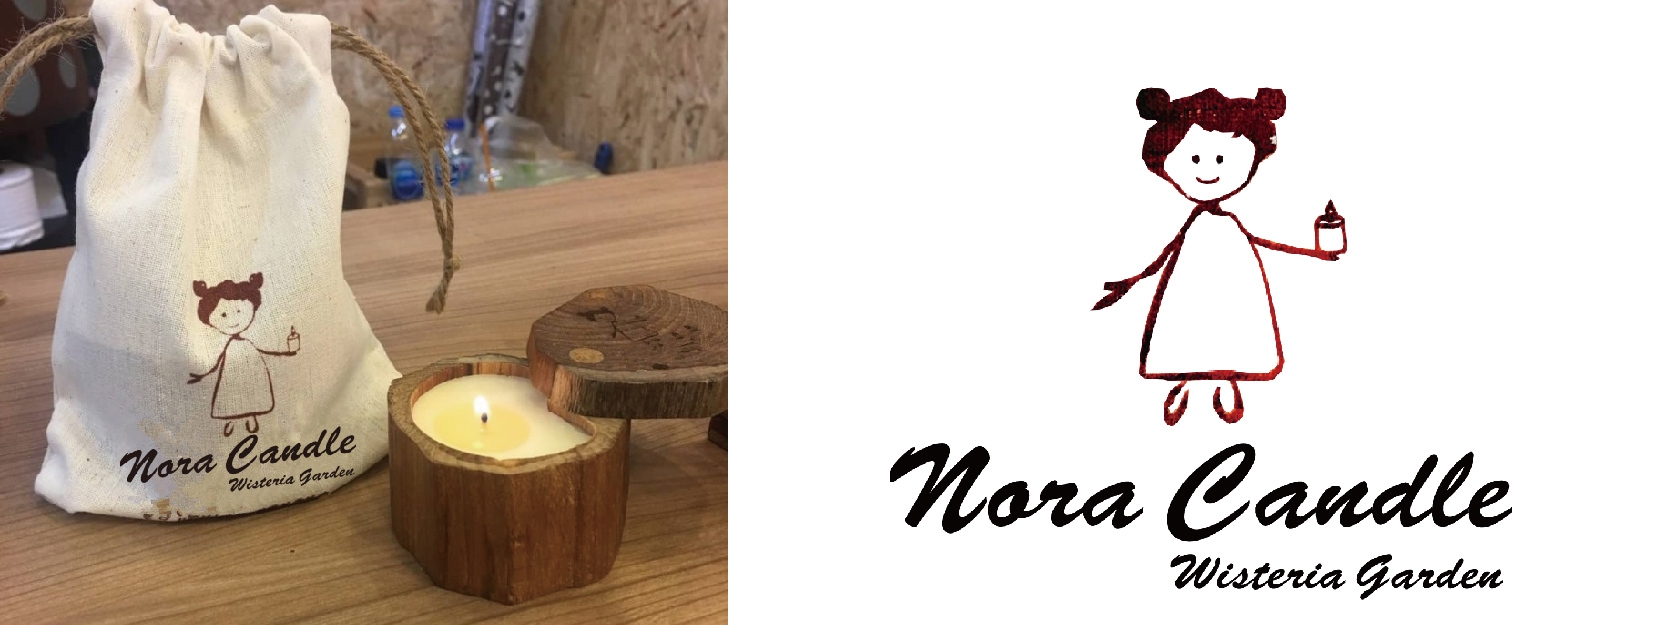 【Nora Candle】